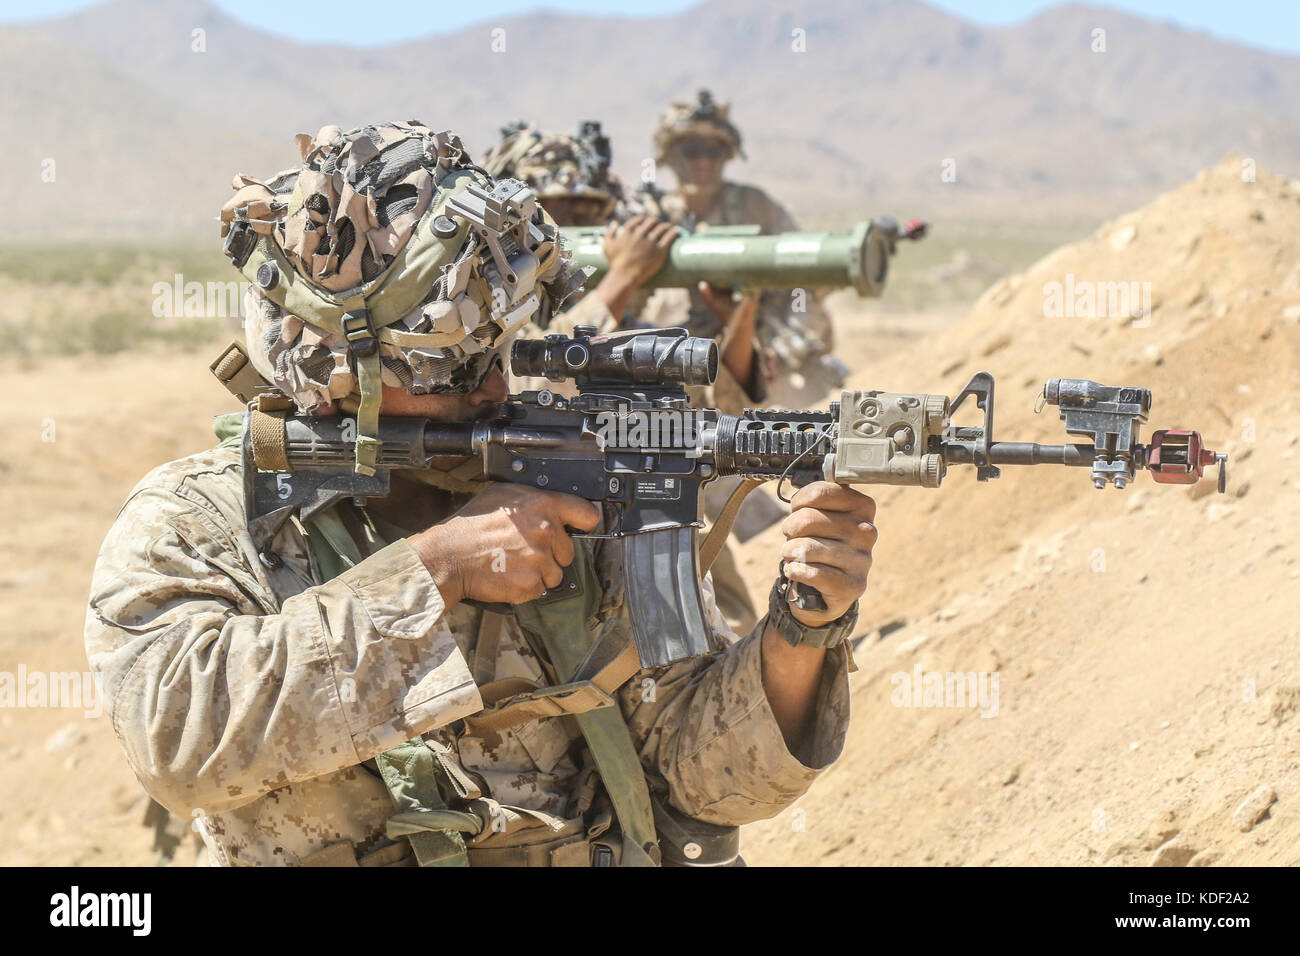 U.S. soldiers fire their weapons during an assault drill at the Fort Irwin National Training Center Alpine Pass June 30, 2017 in Fort Irwin, California.   (photo by Austin Anyzeski  via Planetpix) Stock Photo